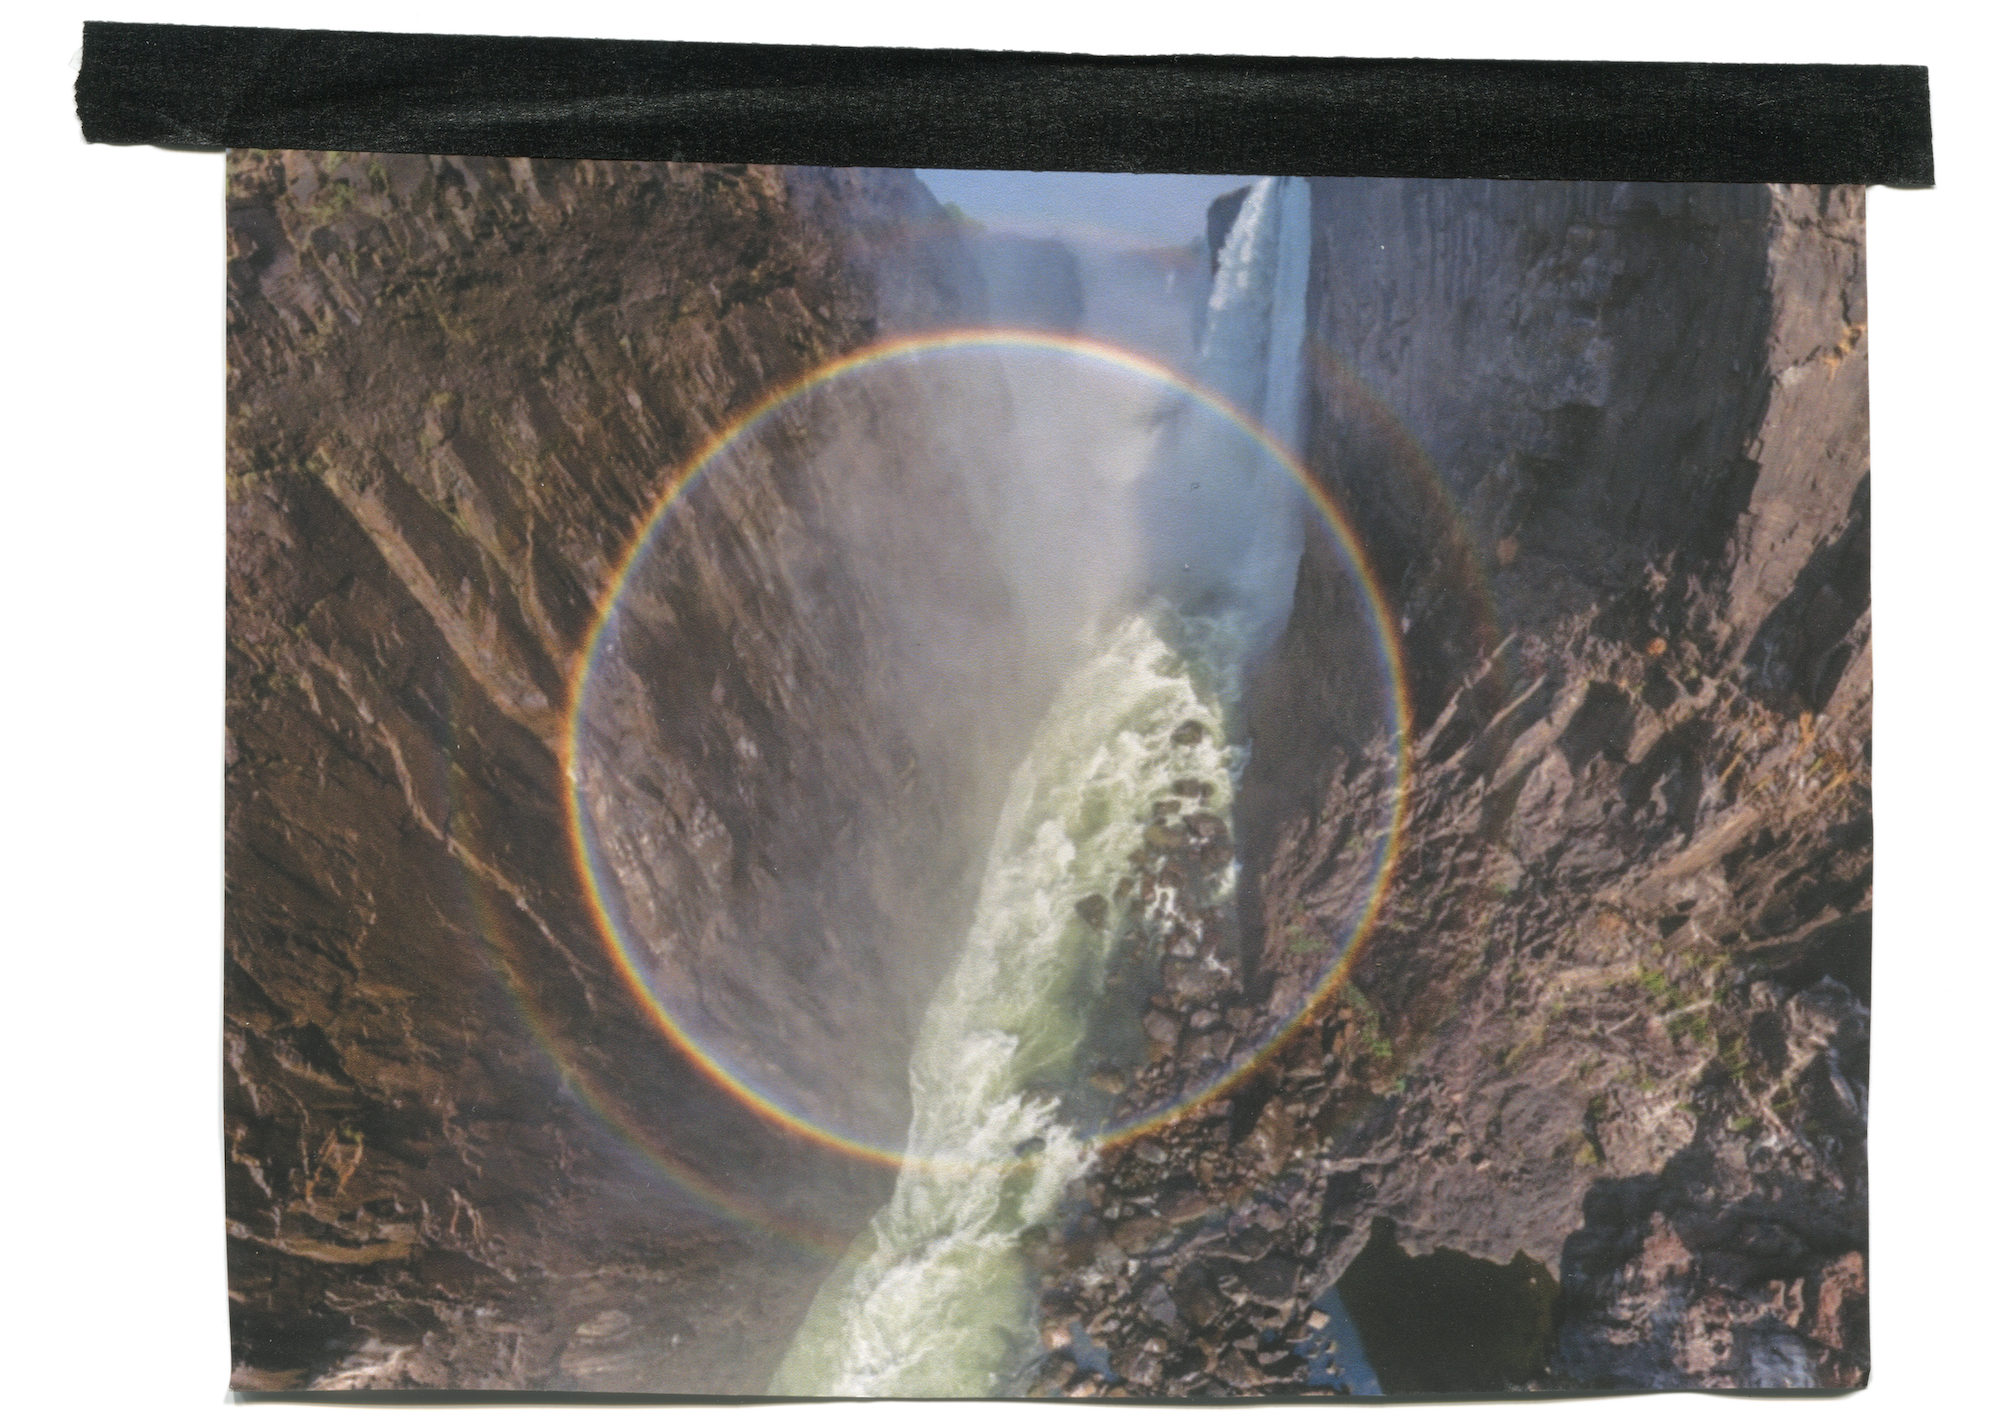 A photo of Victoria Falls with a circular rainbow superimposed over the top.